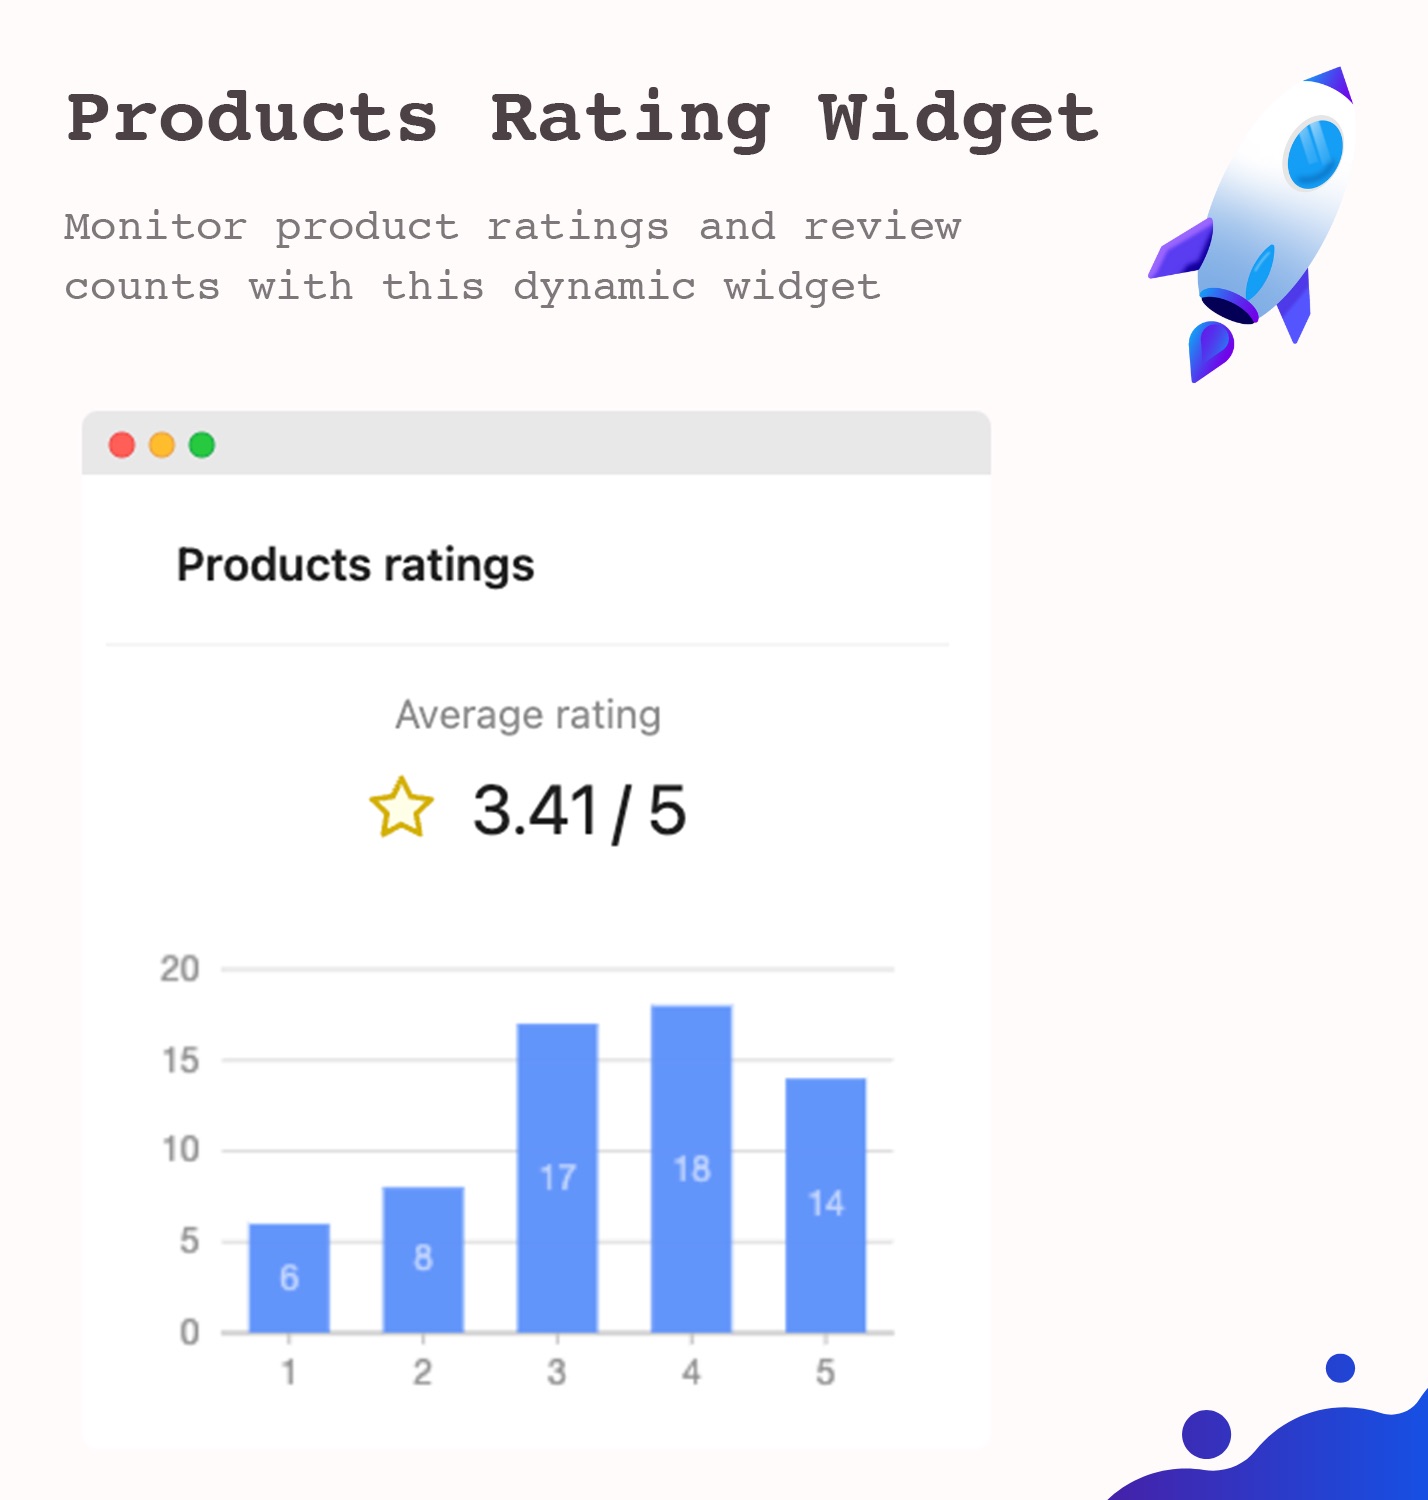 Products rating widget